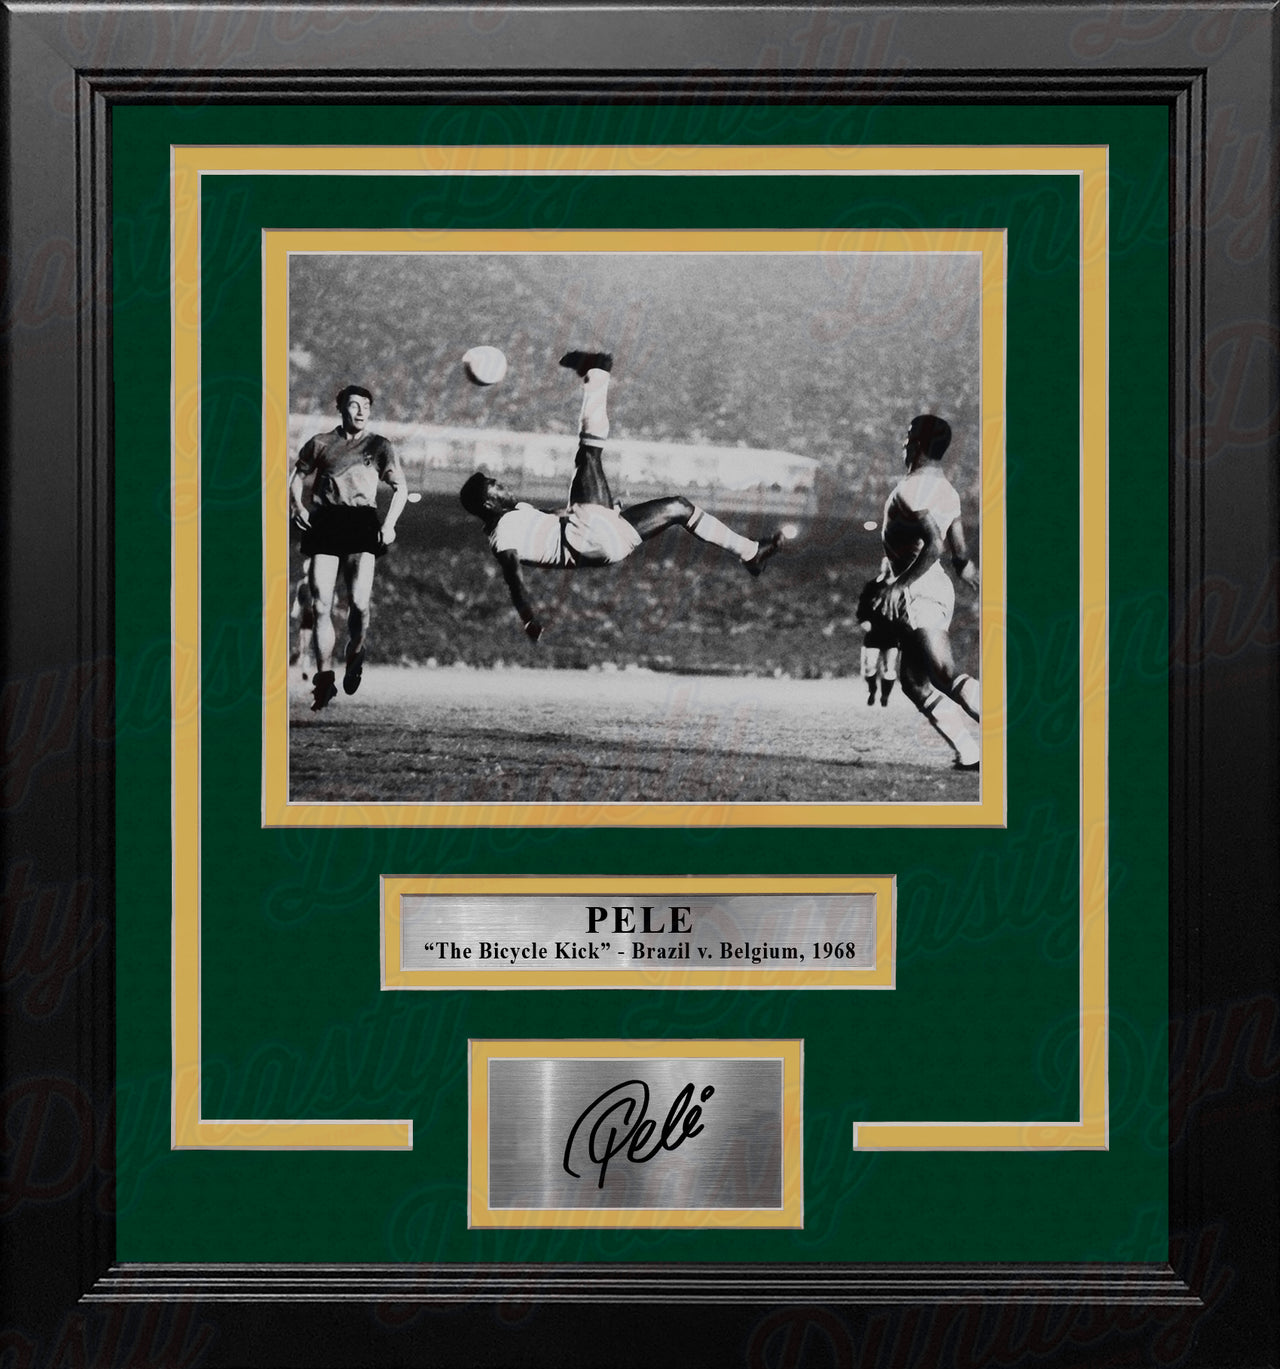 Pele Bicycle Kick Brazil National Team 8x10 Framed Soccer Photo with Engraved Autograph - Dynasty Sports & Framing 